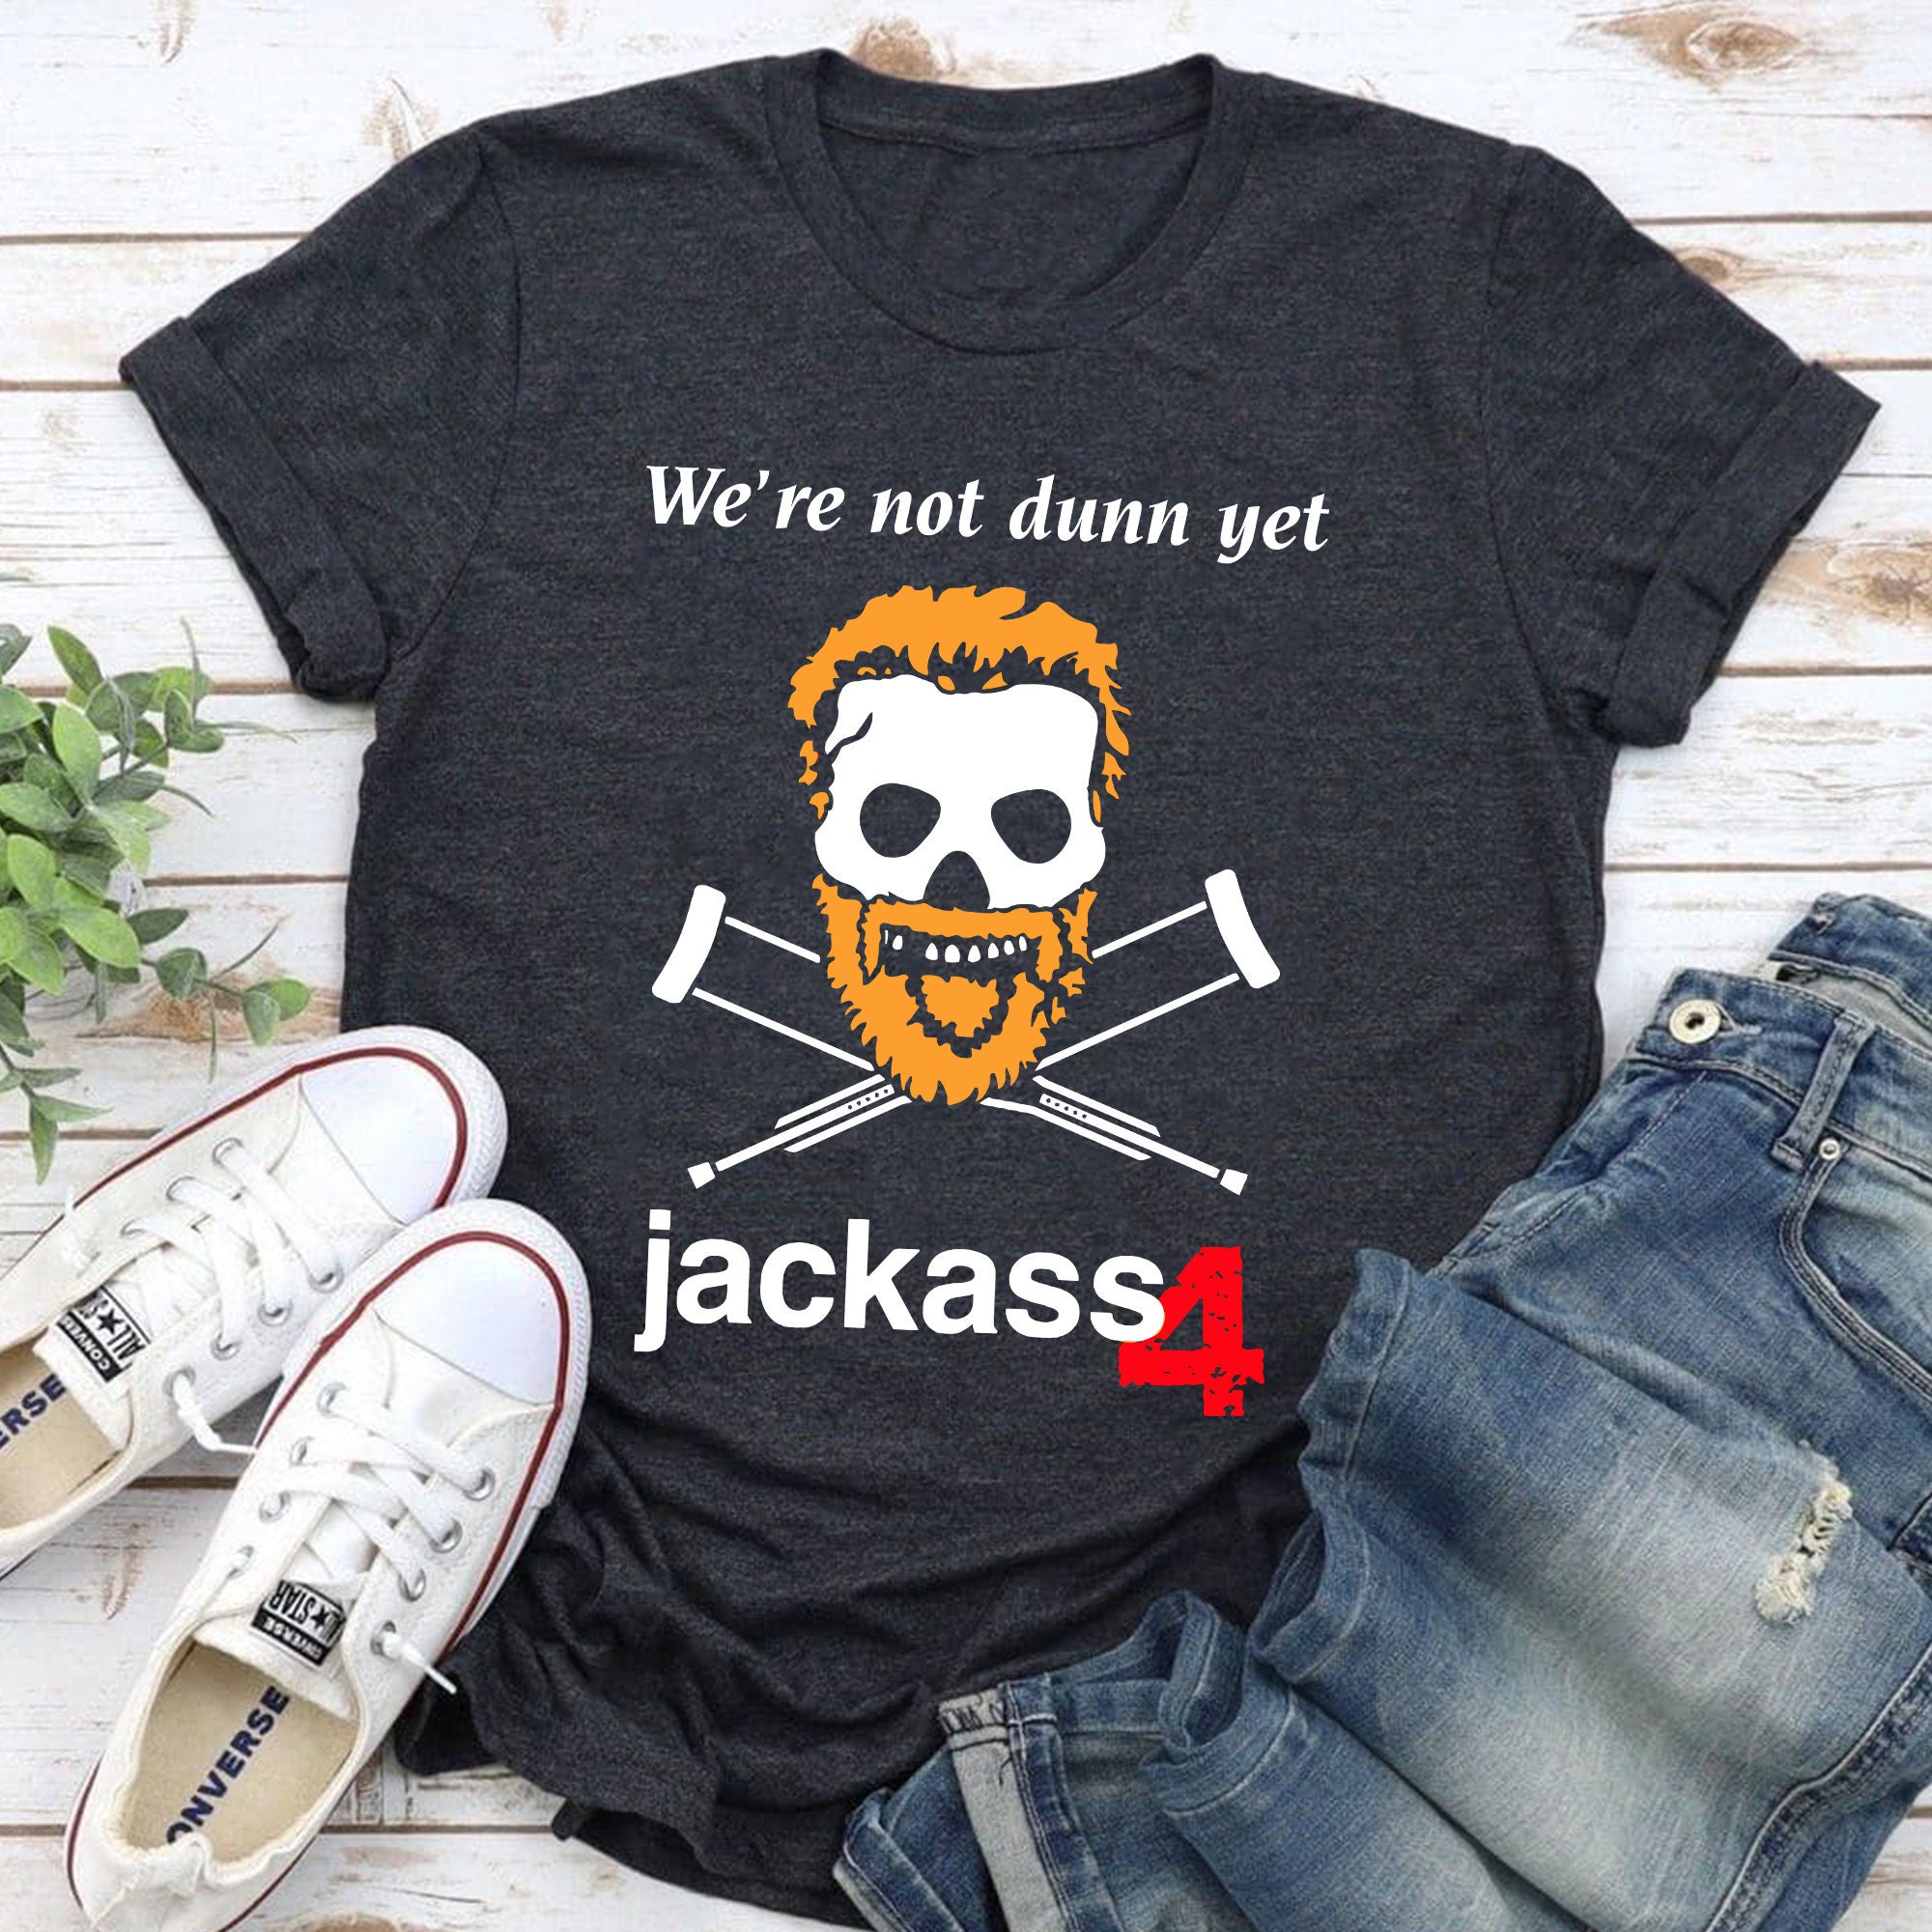 Jackass Skull And Crutches Logo Graphic Unisex T-Shirt